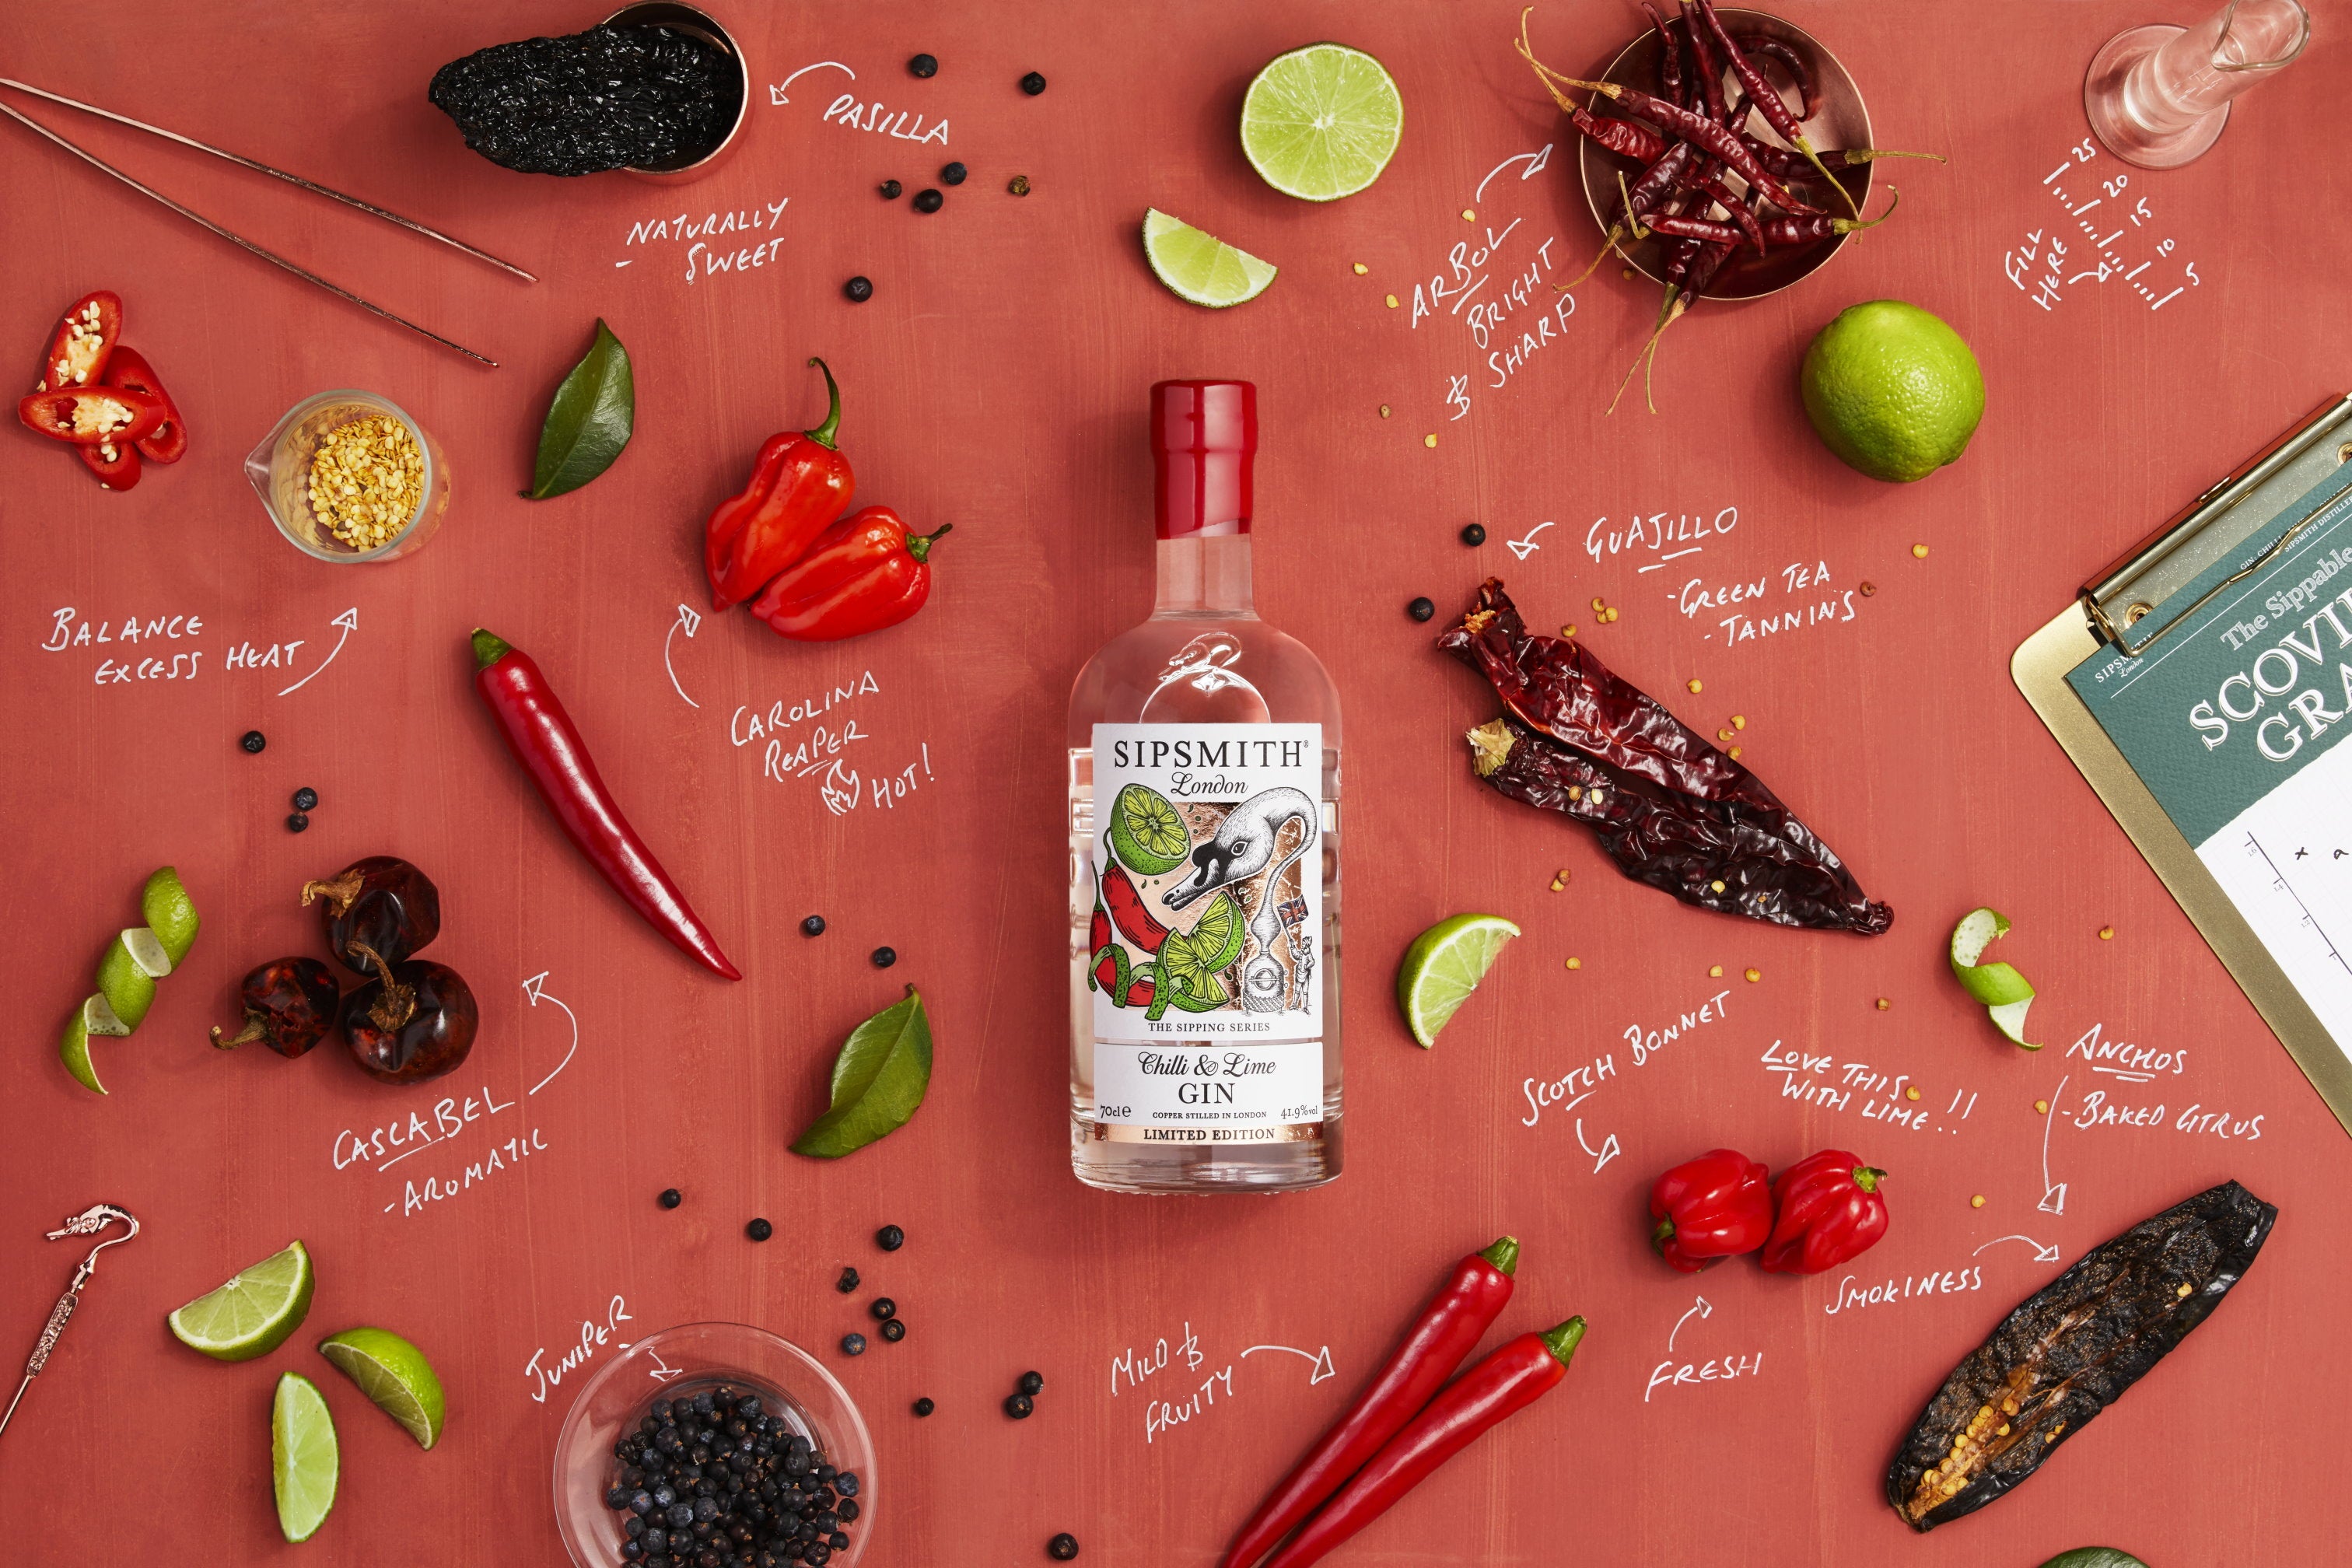 Booze Up Alcohol Delivery Service Partners with Sipsmith Gin To Provide London With Award-Winning Craft Gin